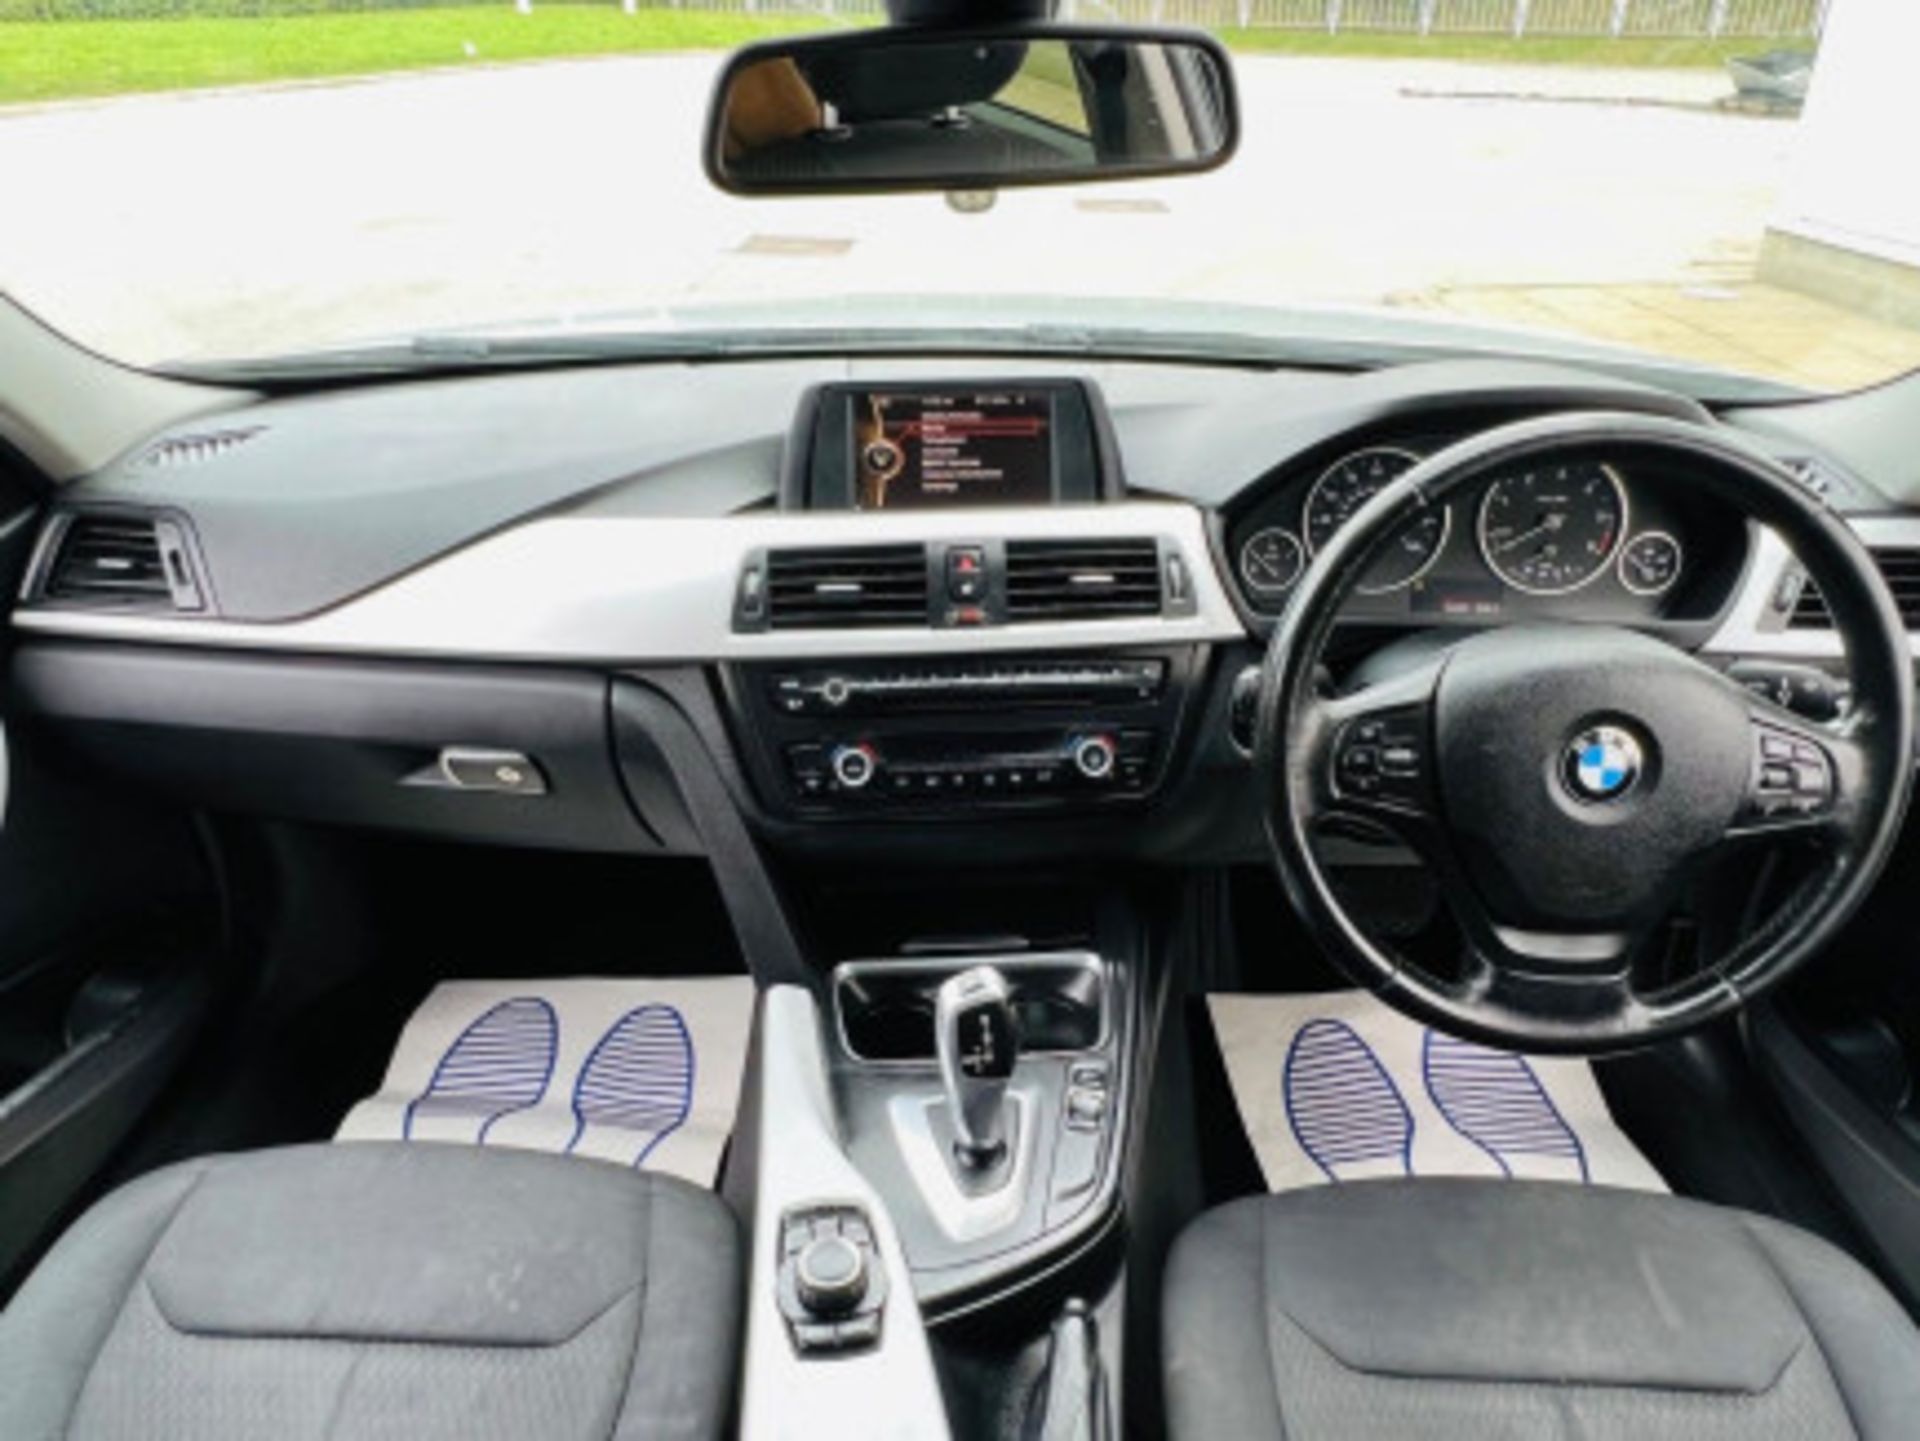 BMW 3 SERIES 2.0 DIESEL ED START STOP - A WELL-MAINTAINED GEM >>--NO VAT ON HAMMER--<< - Image 50 of 229